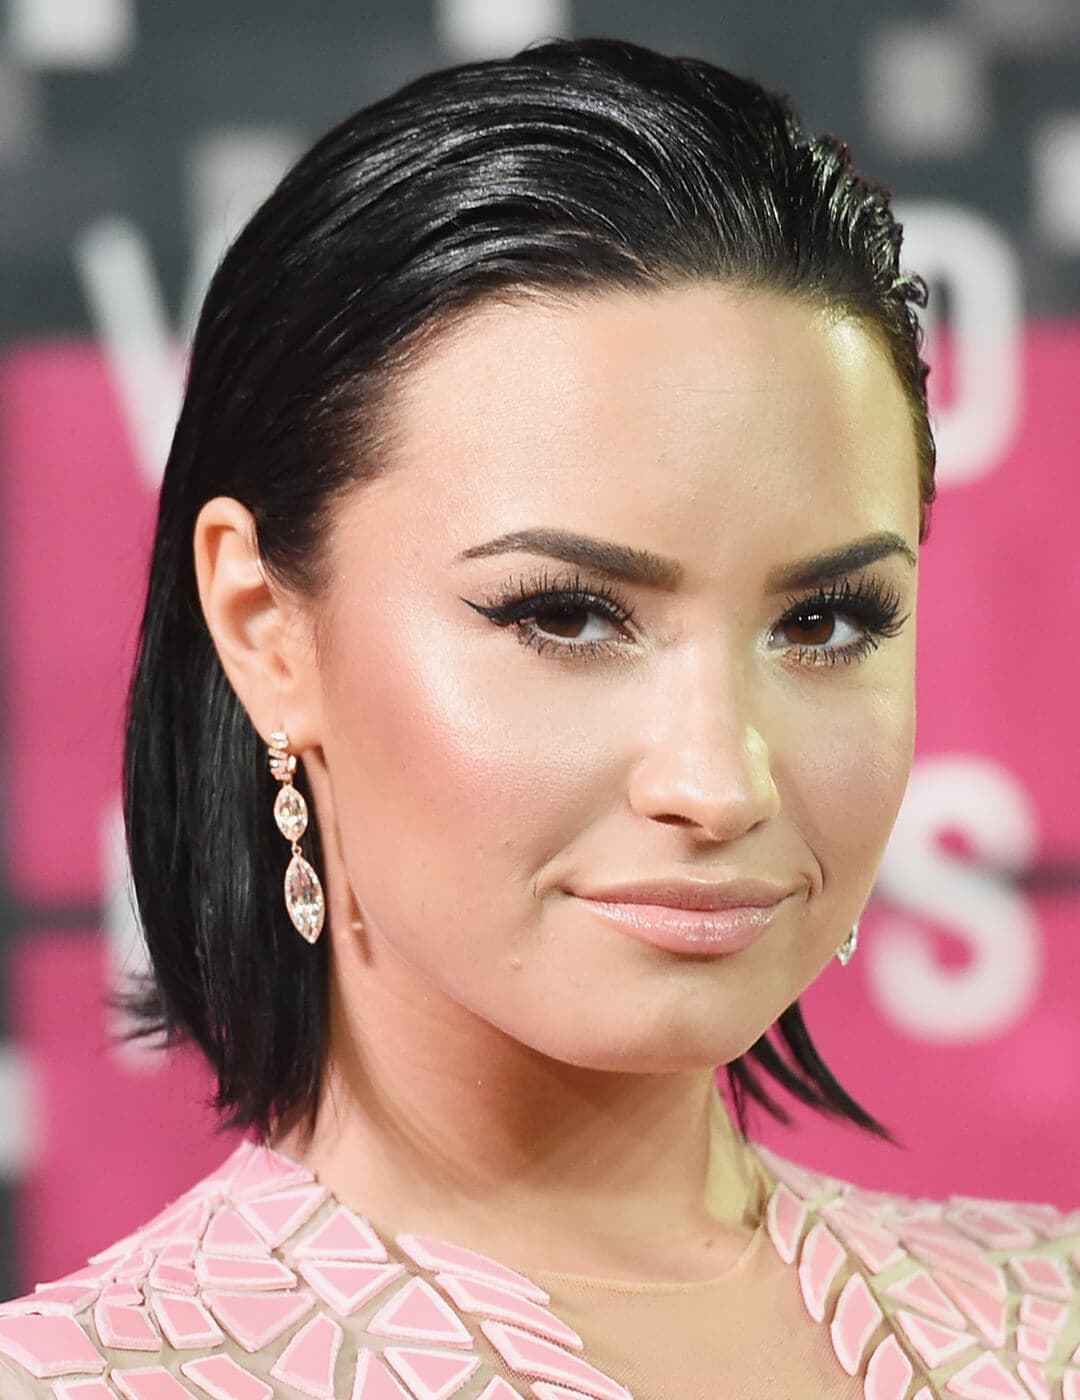 A photo of Demi Lovato showcasing her combed back, dewy look bob hair paired with an elegant earring 